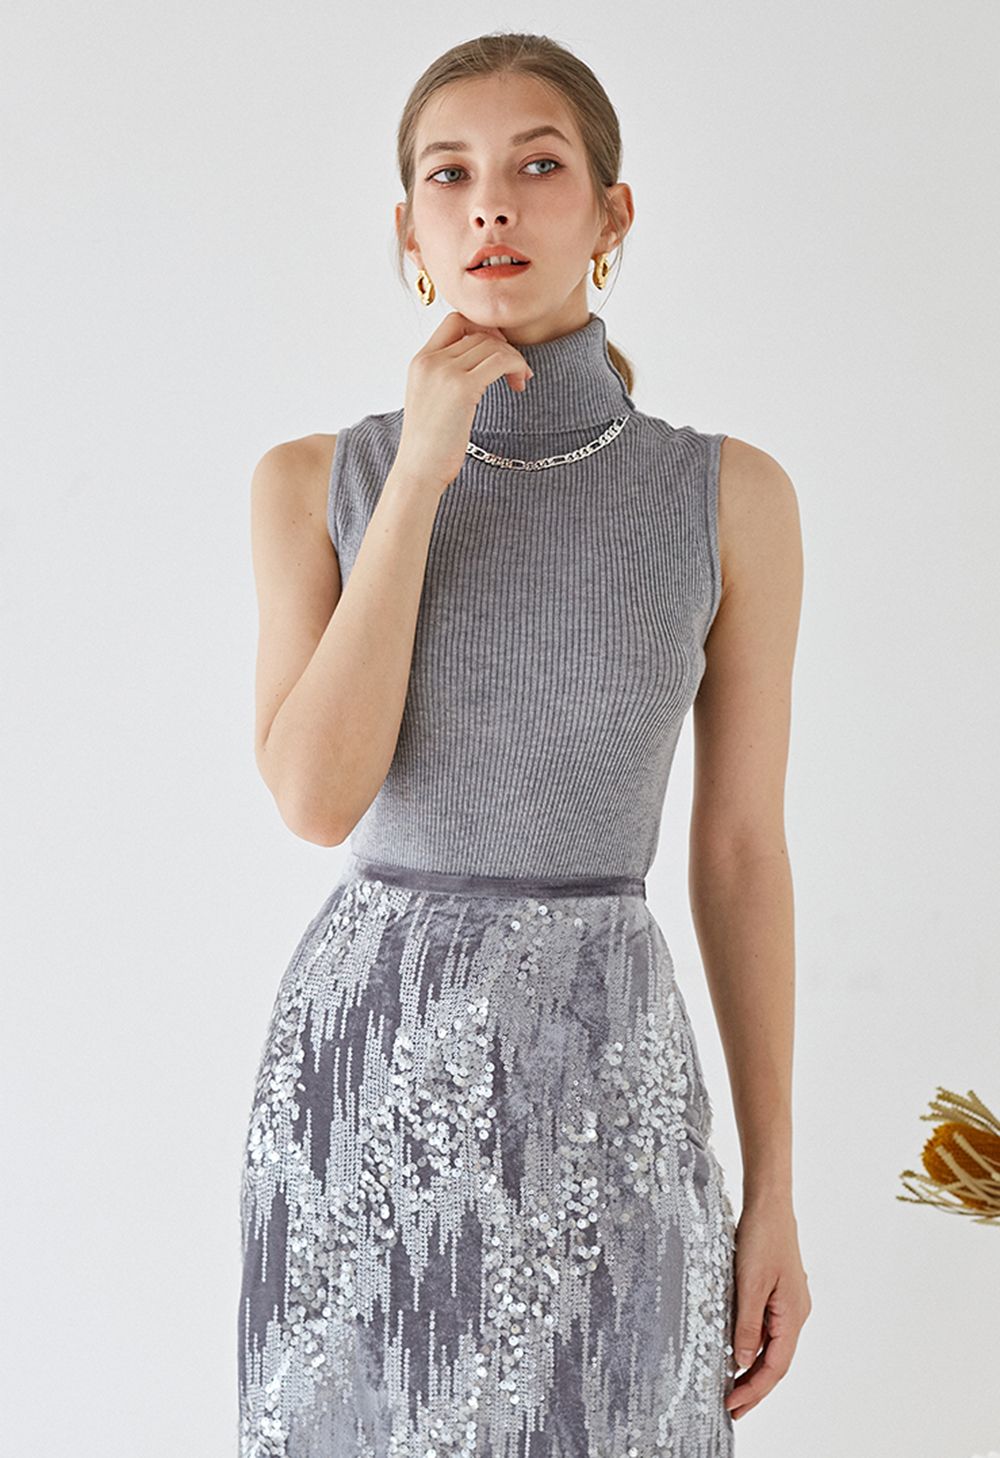 Turtleneck Soft Knit Sleeveless Top in Grey